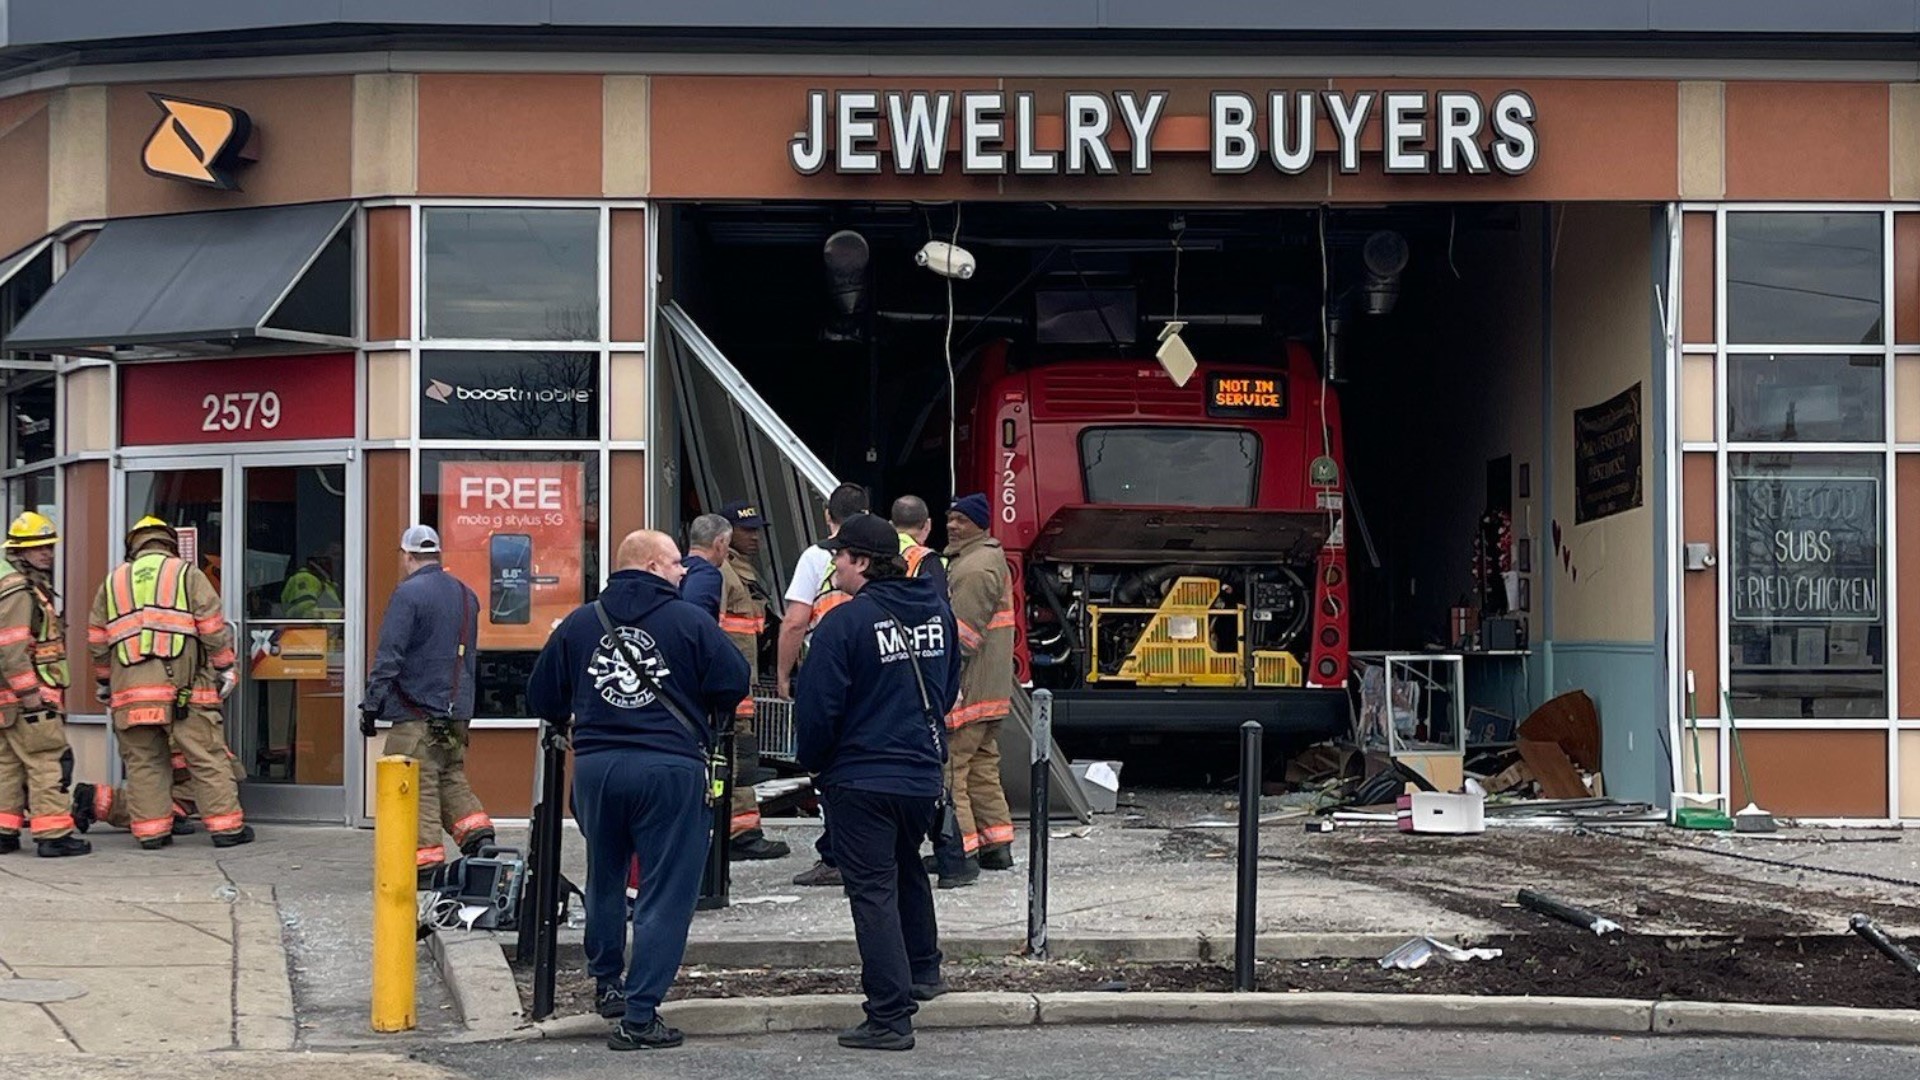 A Metrobus crashed into a jewelry store in Montgomery County Thursday morning, sending three people to the hospital.